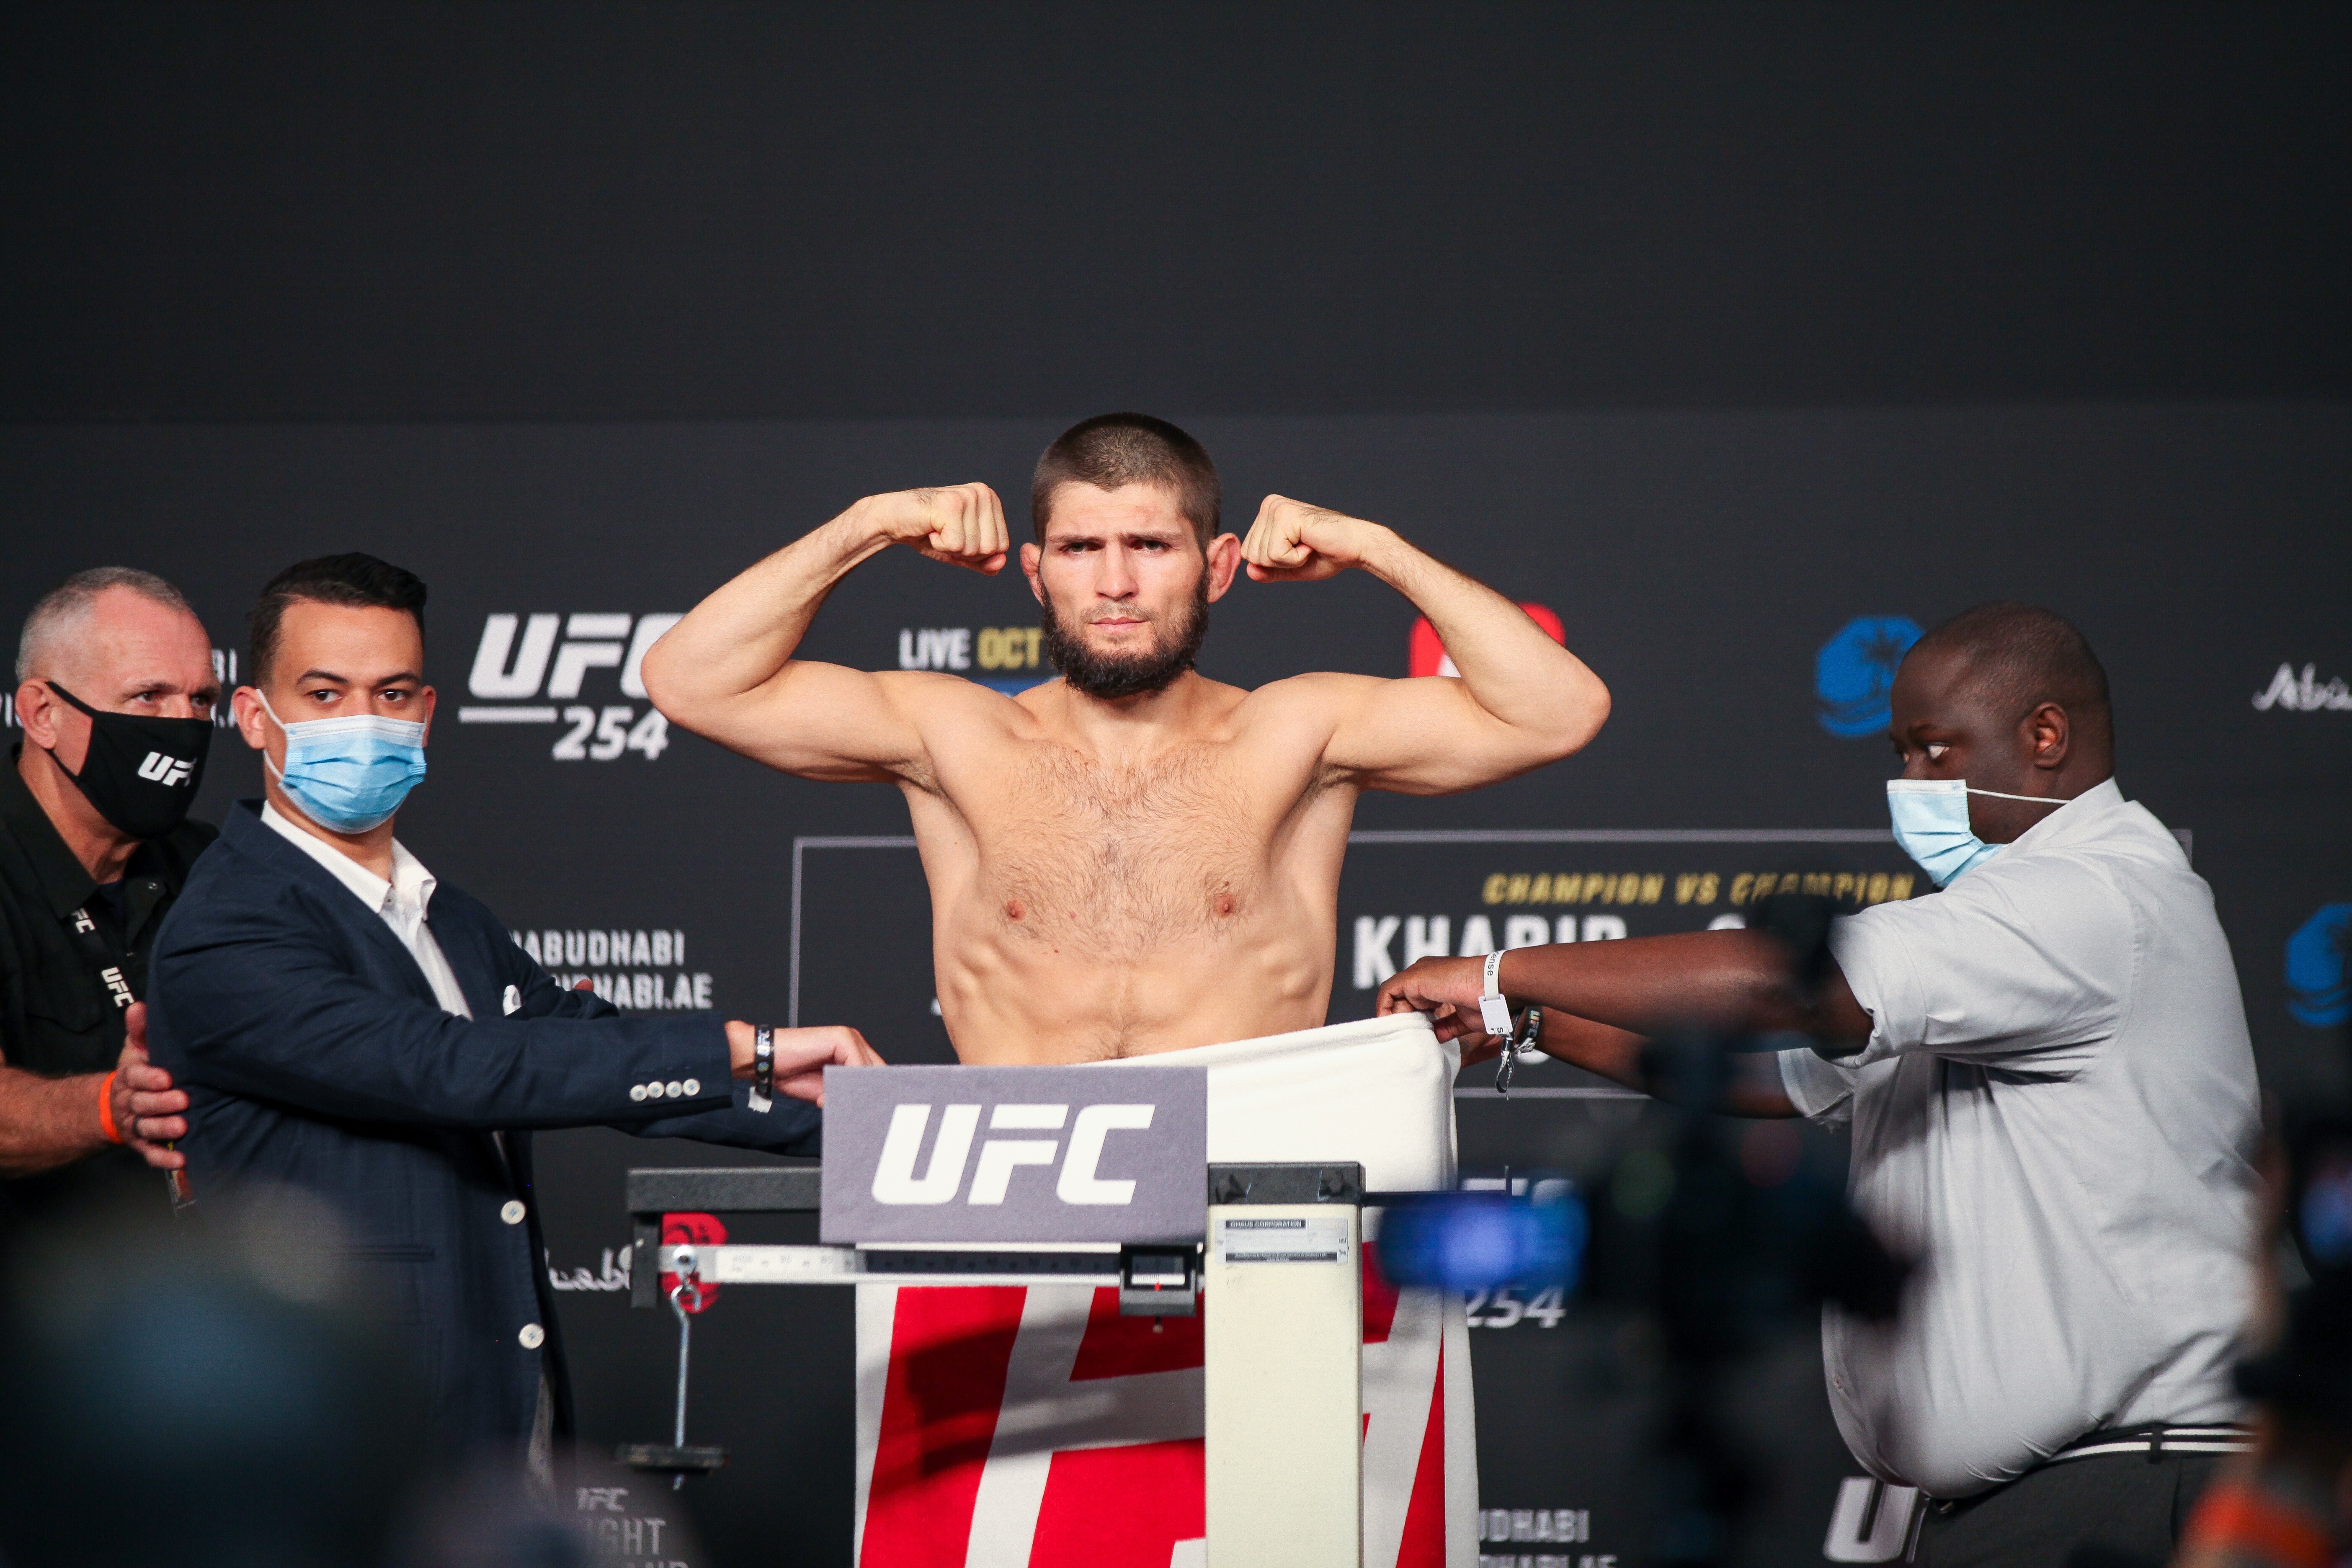 Khabib Nurmagomedov poses on the scale after officially making weight for UFC 254. Photo: Amy Kaplan